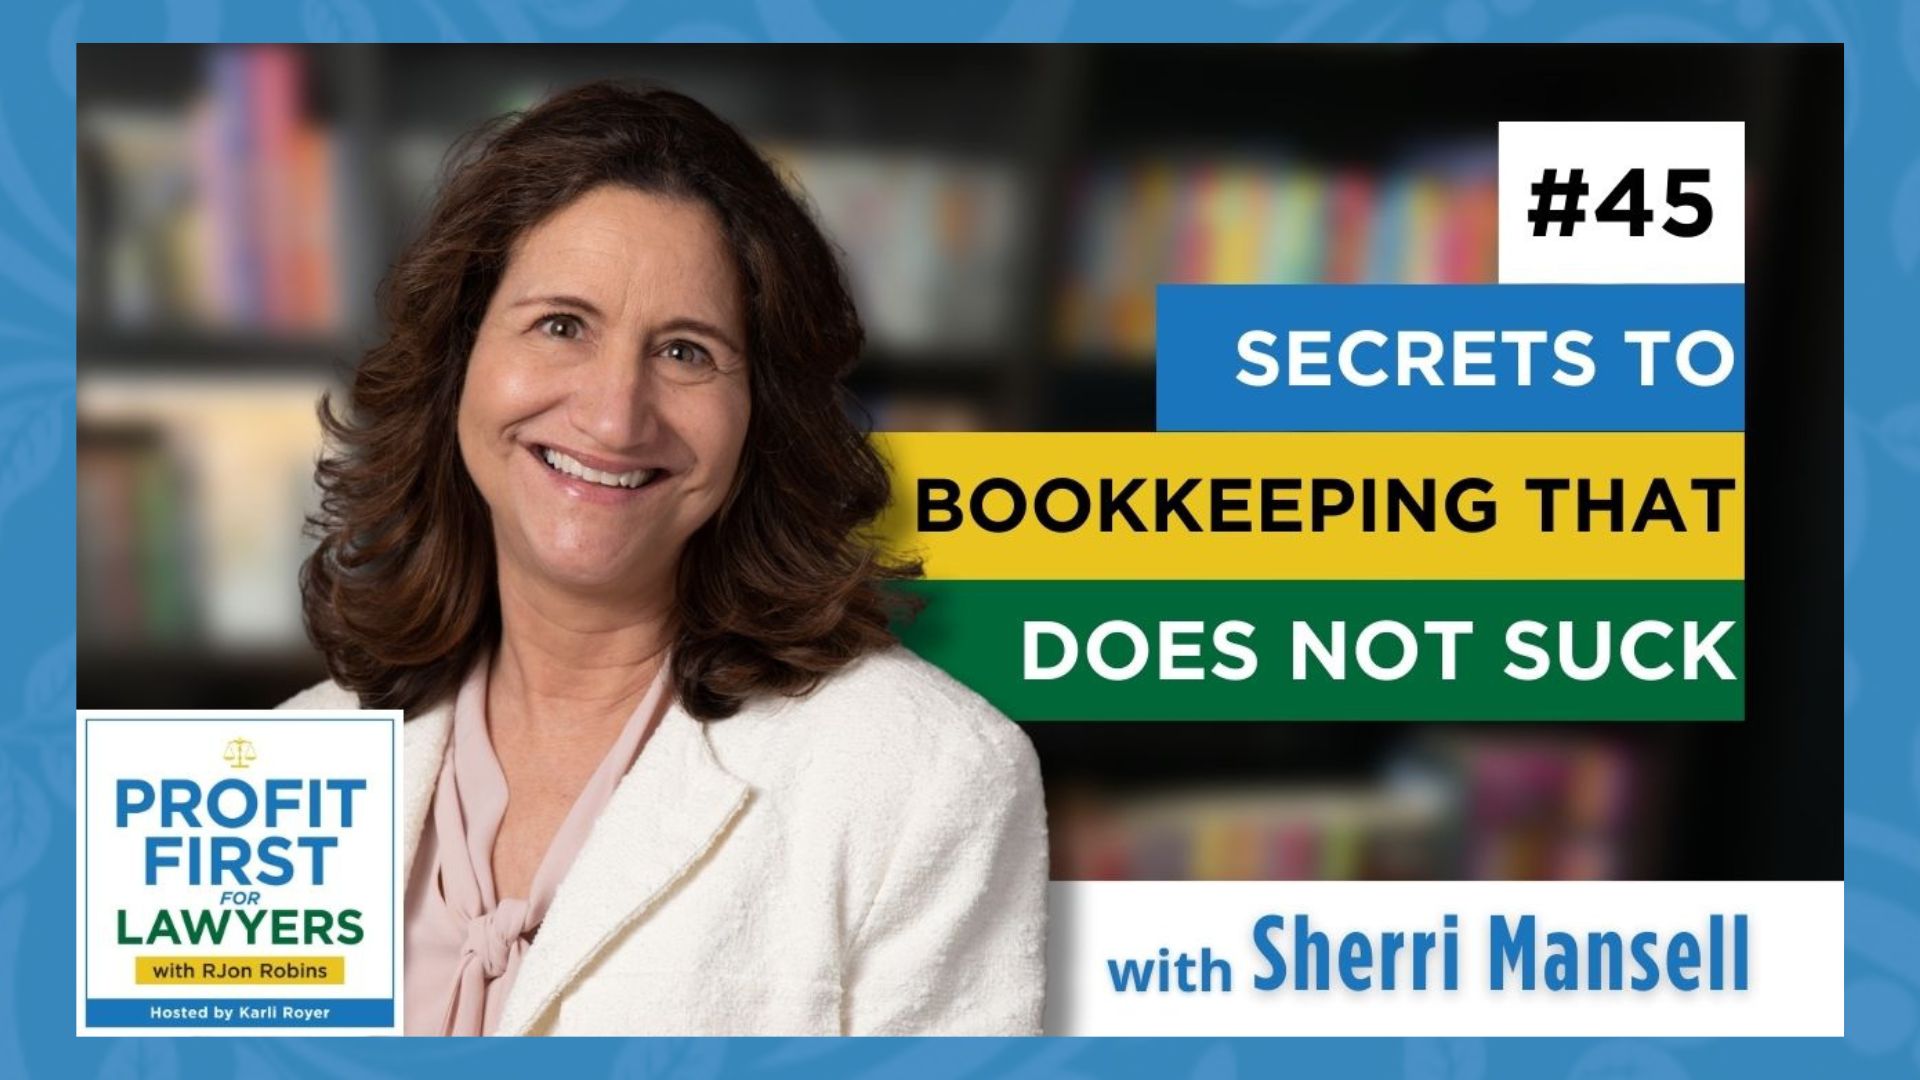 featured image with Sherri Mansell for episode 45 titled, "Secrets To Bookkeeping That Does Not Suck"